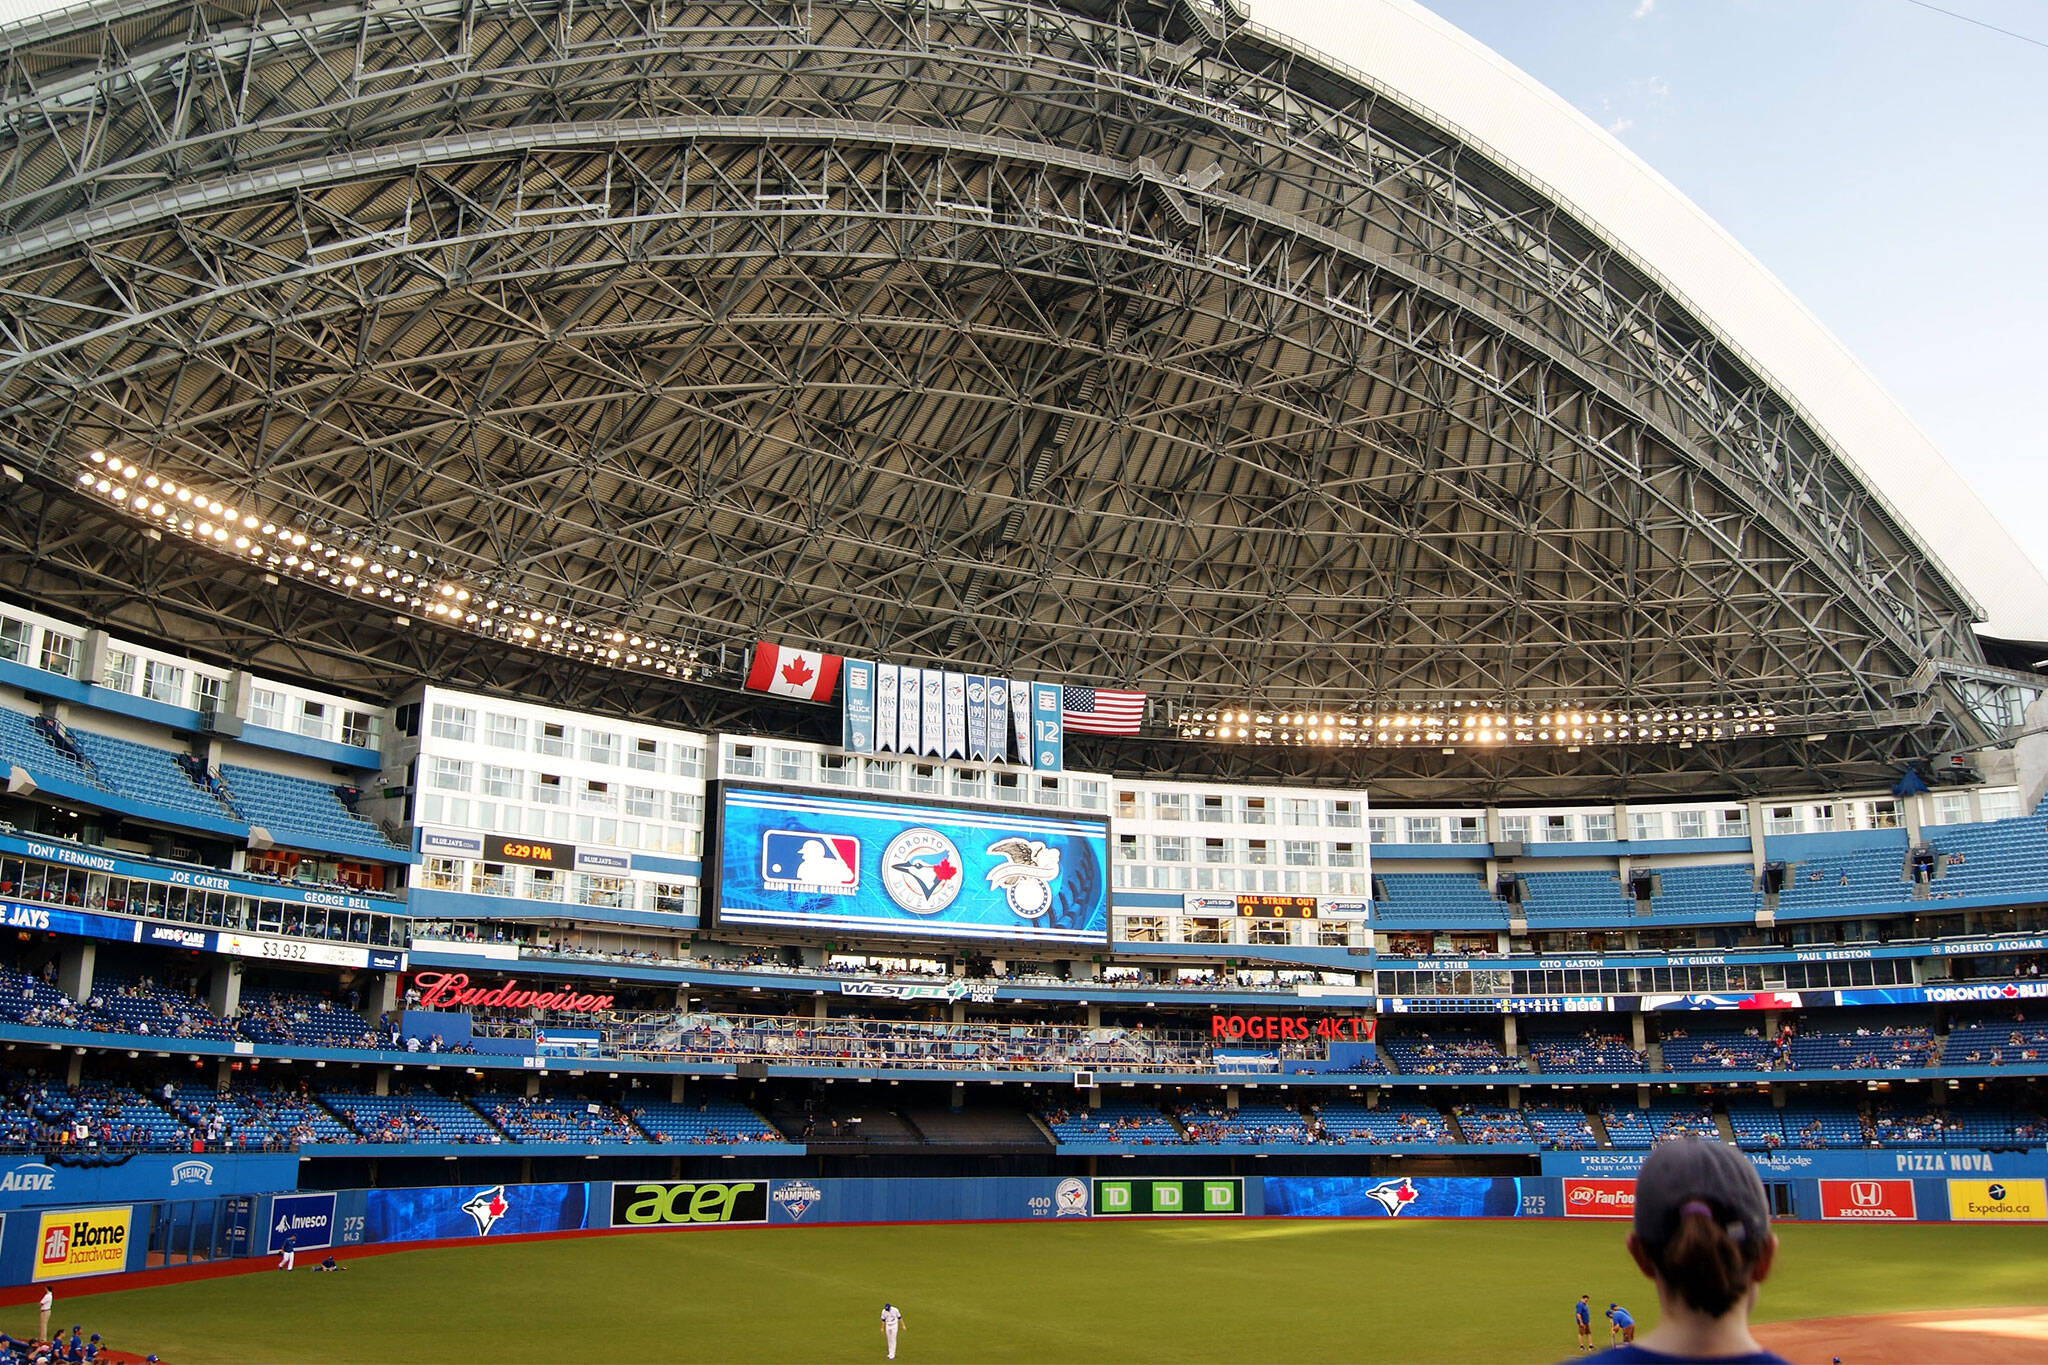 Blue Jays renovate Rogers Centre for 2022 with a new scoreboard, lights, and concessions.